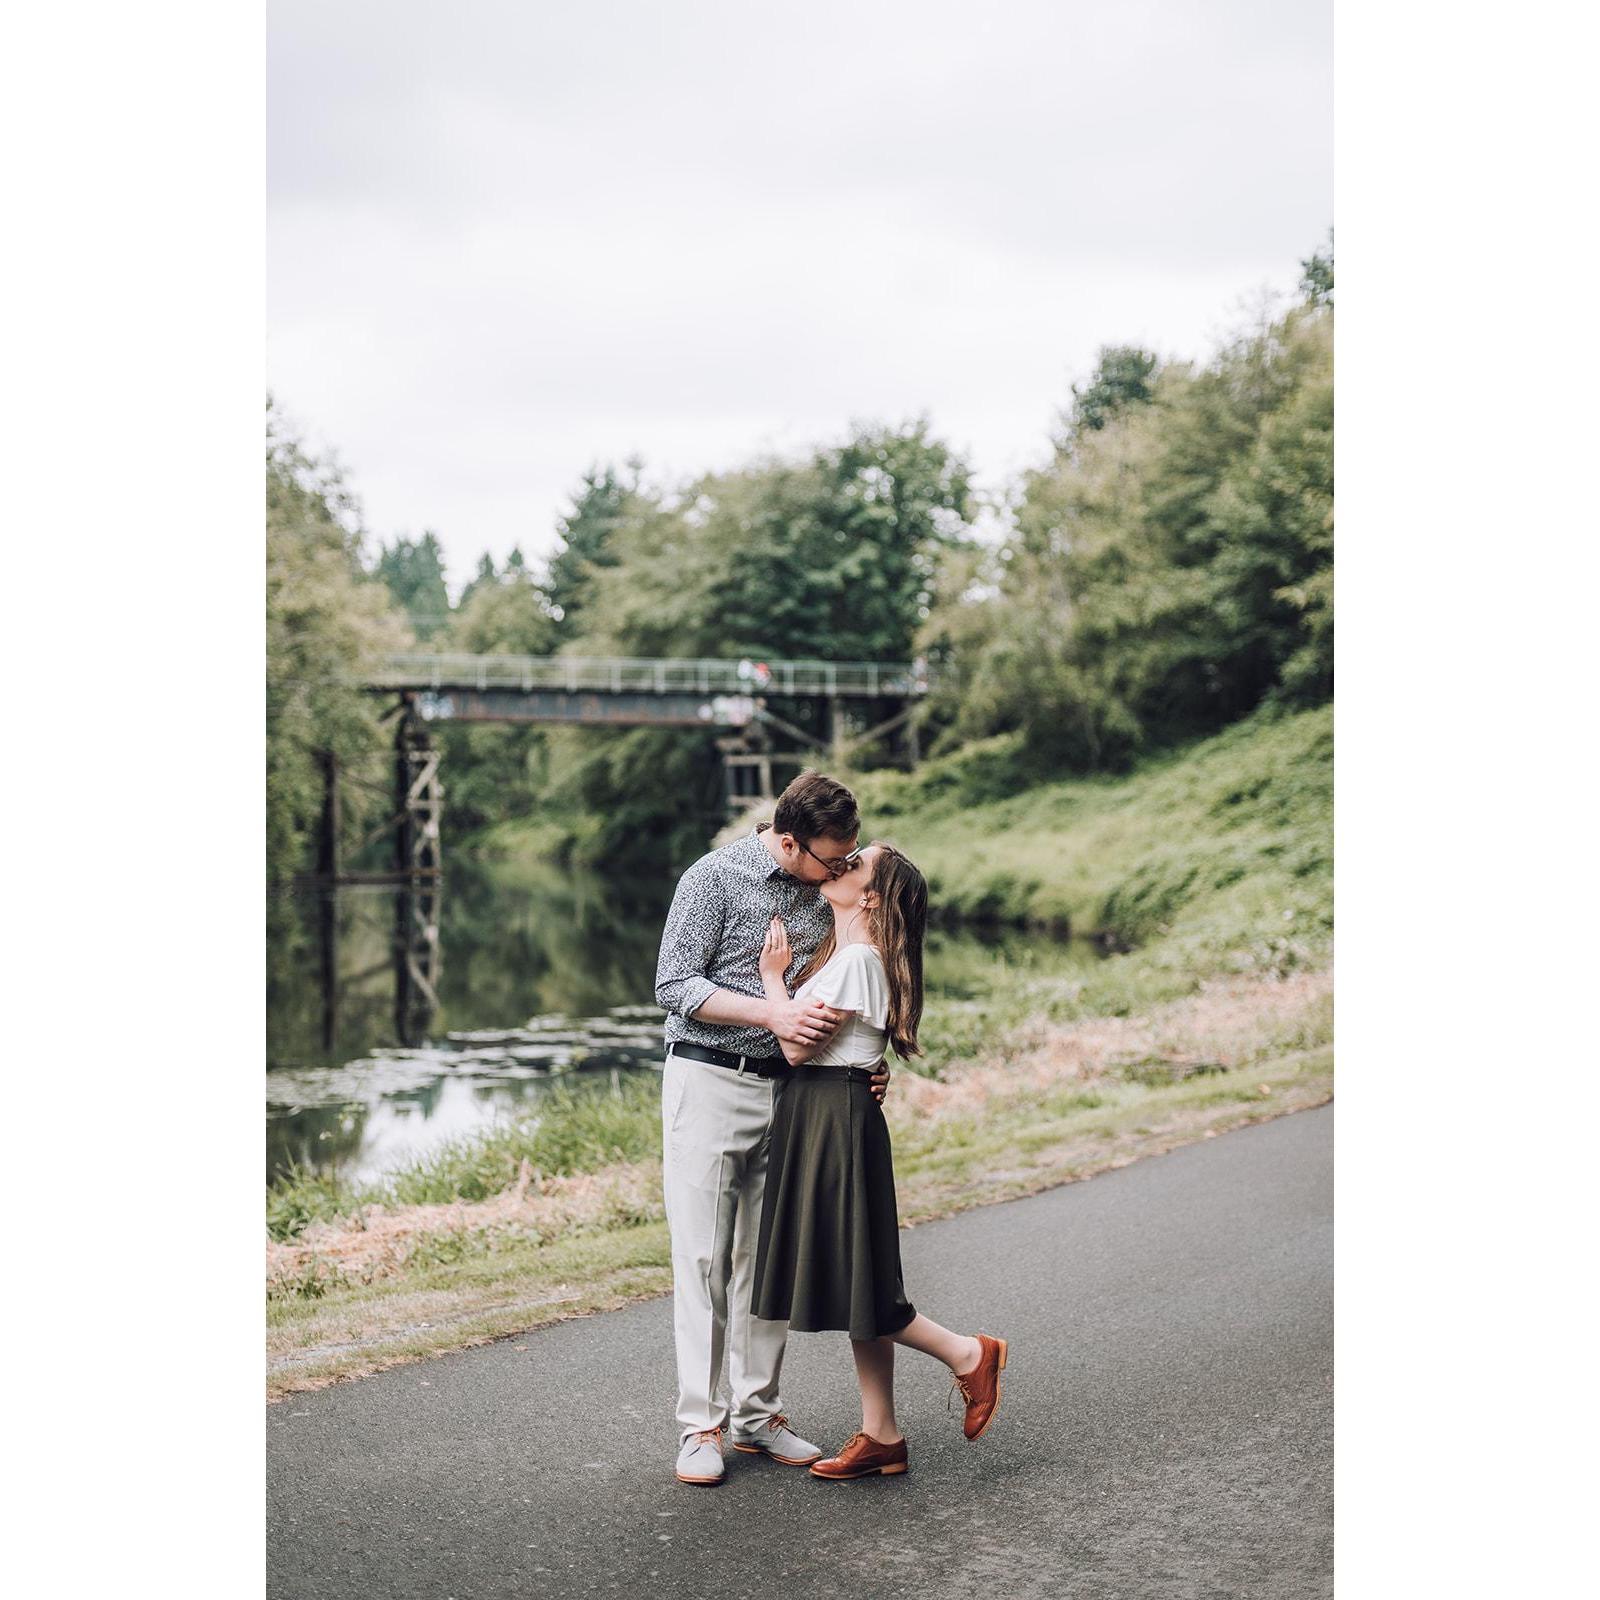 We took our engagement photos in Bothell, near Bothell Landing, the river trail, and Blythe Park. We used to walk our dog Hoss here.